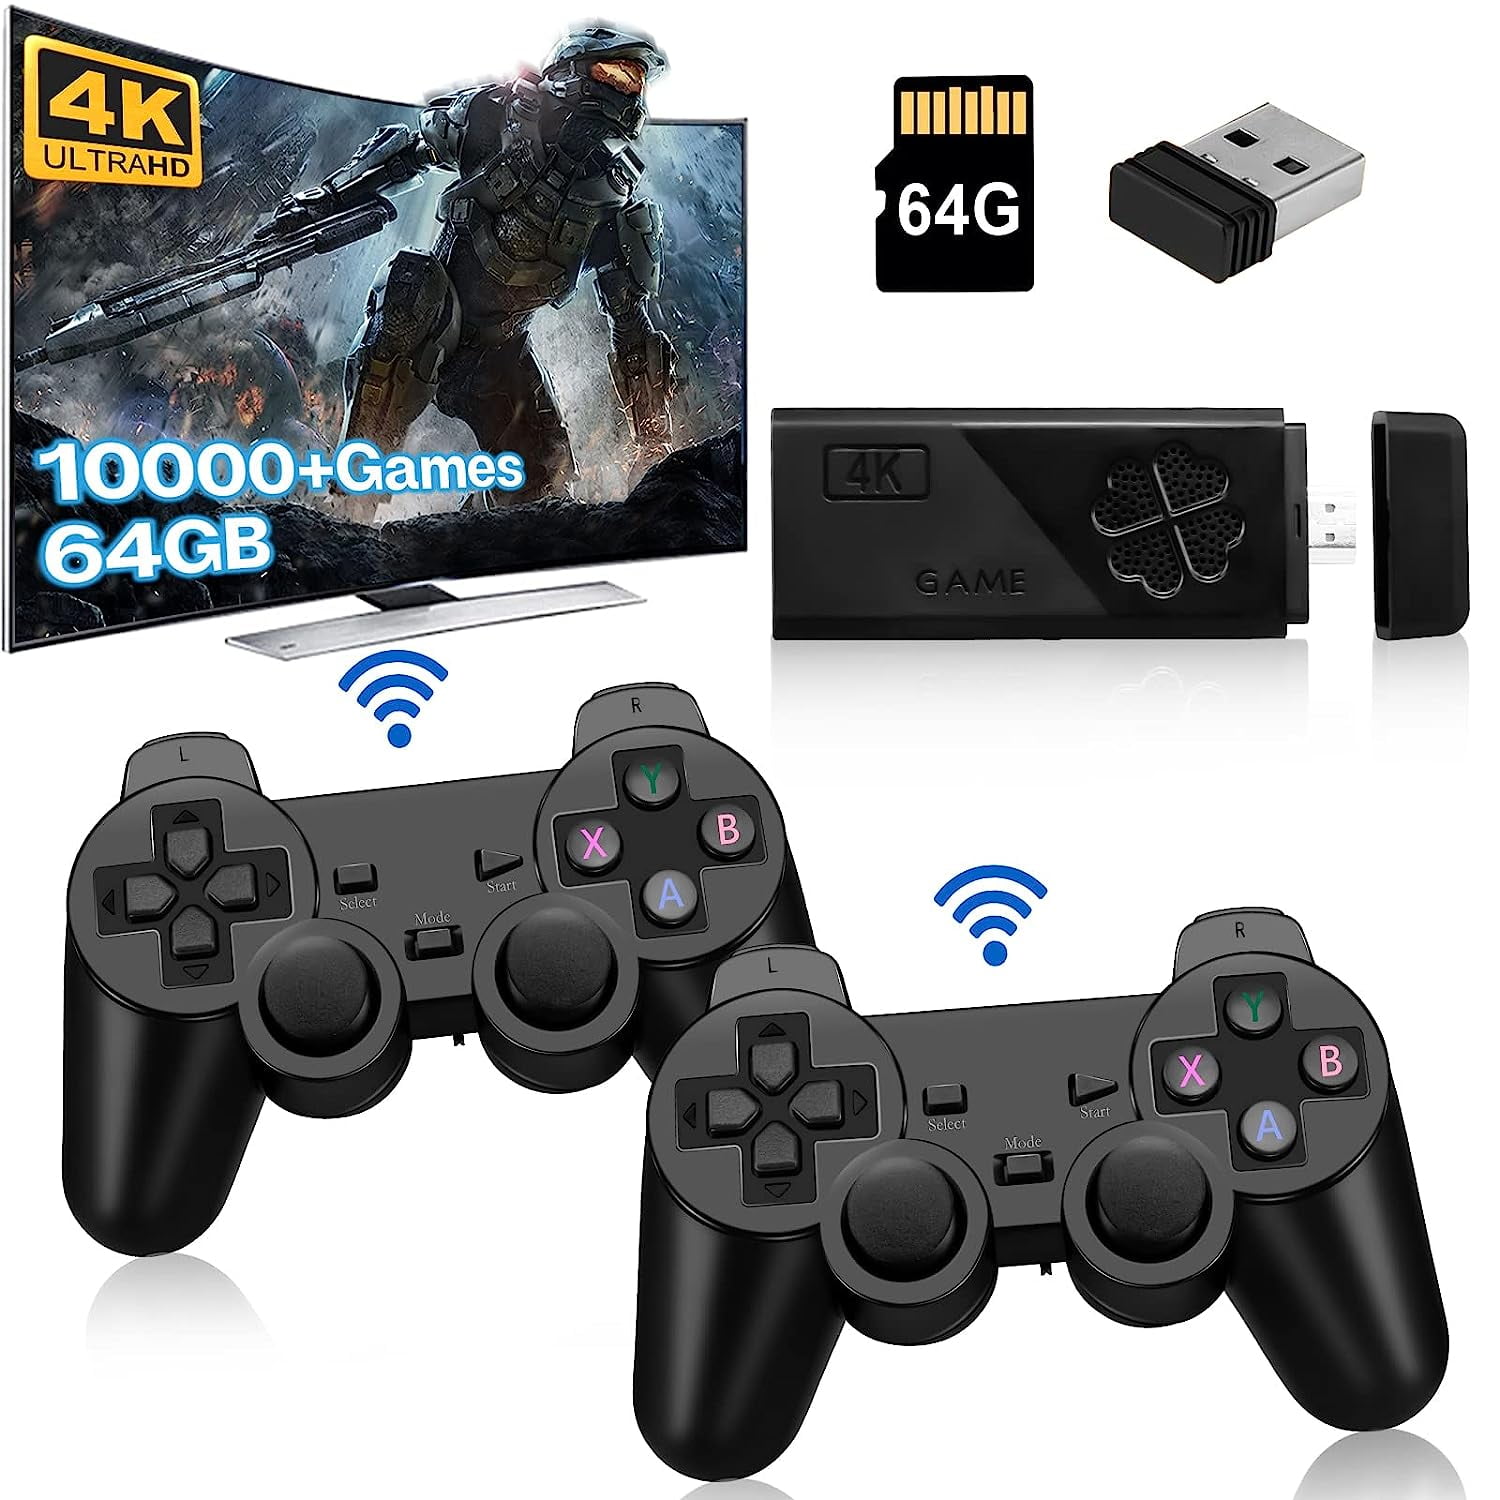 Mini TV Android Stick Game Stick 10000 Games 4K Retro Video Game Consoles  For PS1 PSP SFC Android TV Stick for Netflix